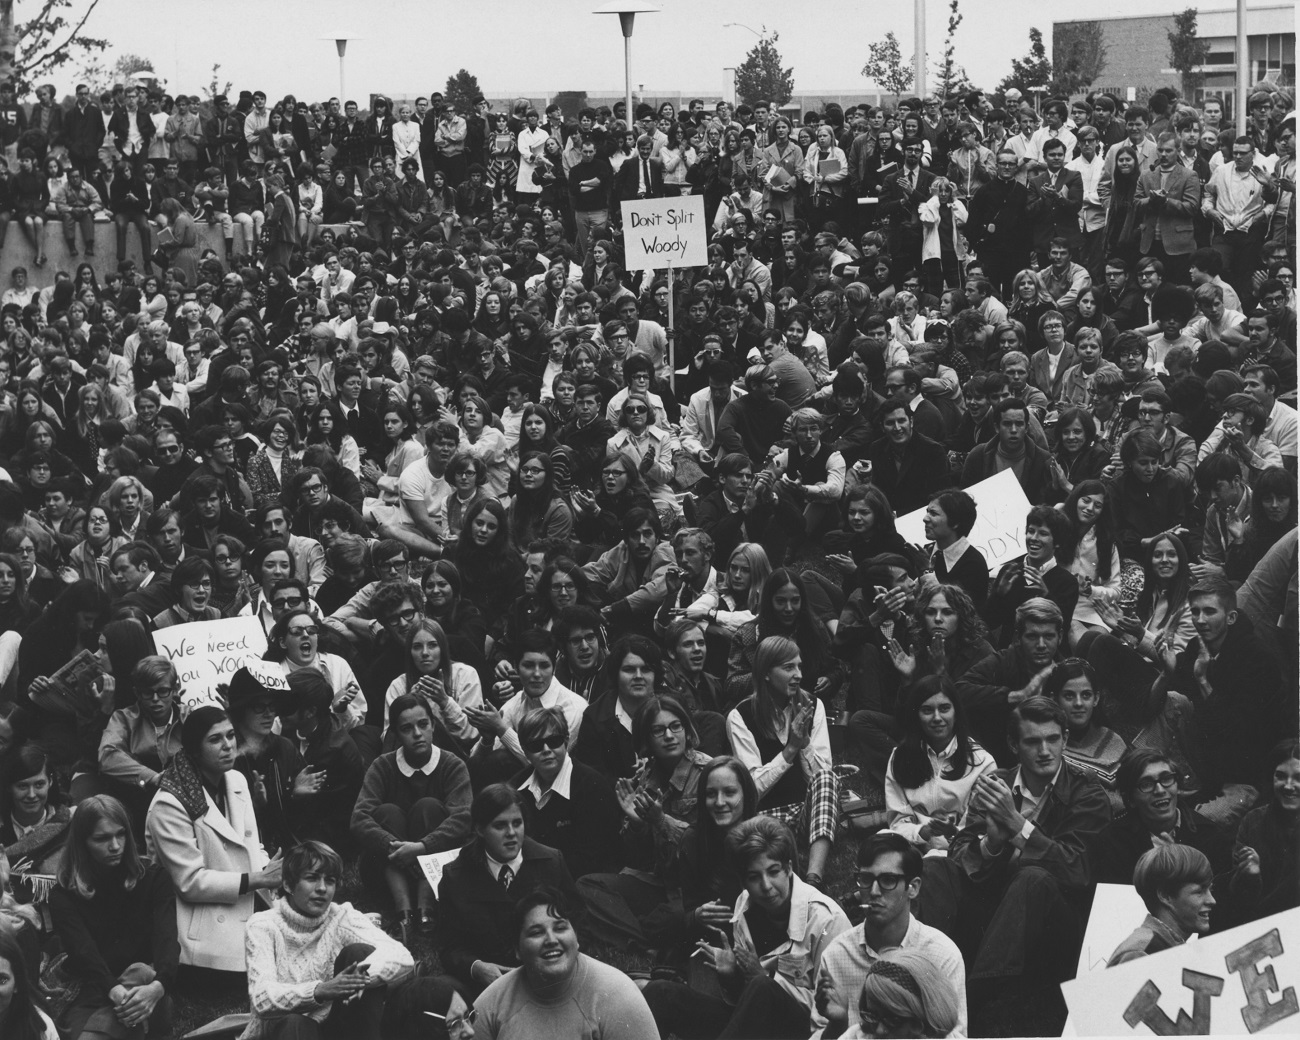 Black and White photograph of students gathered for Varner